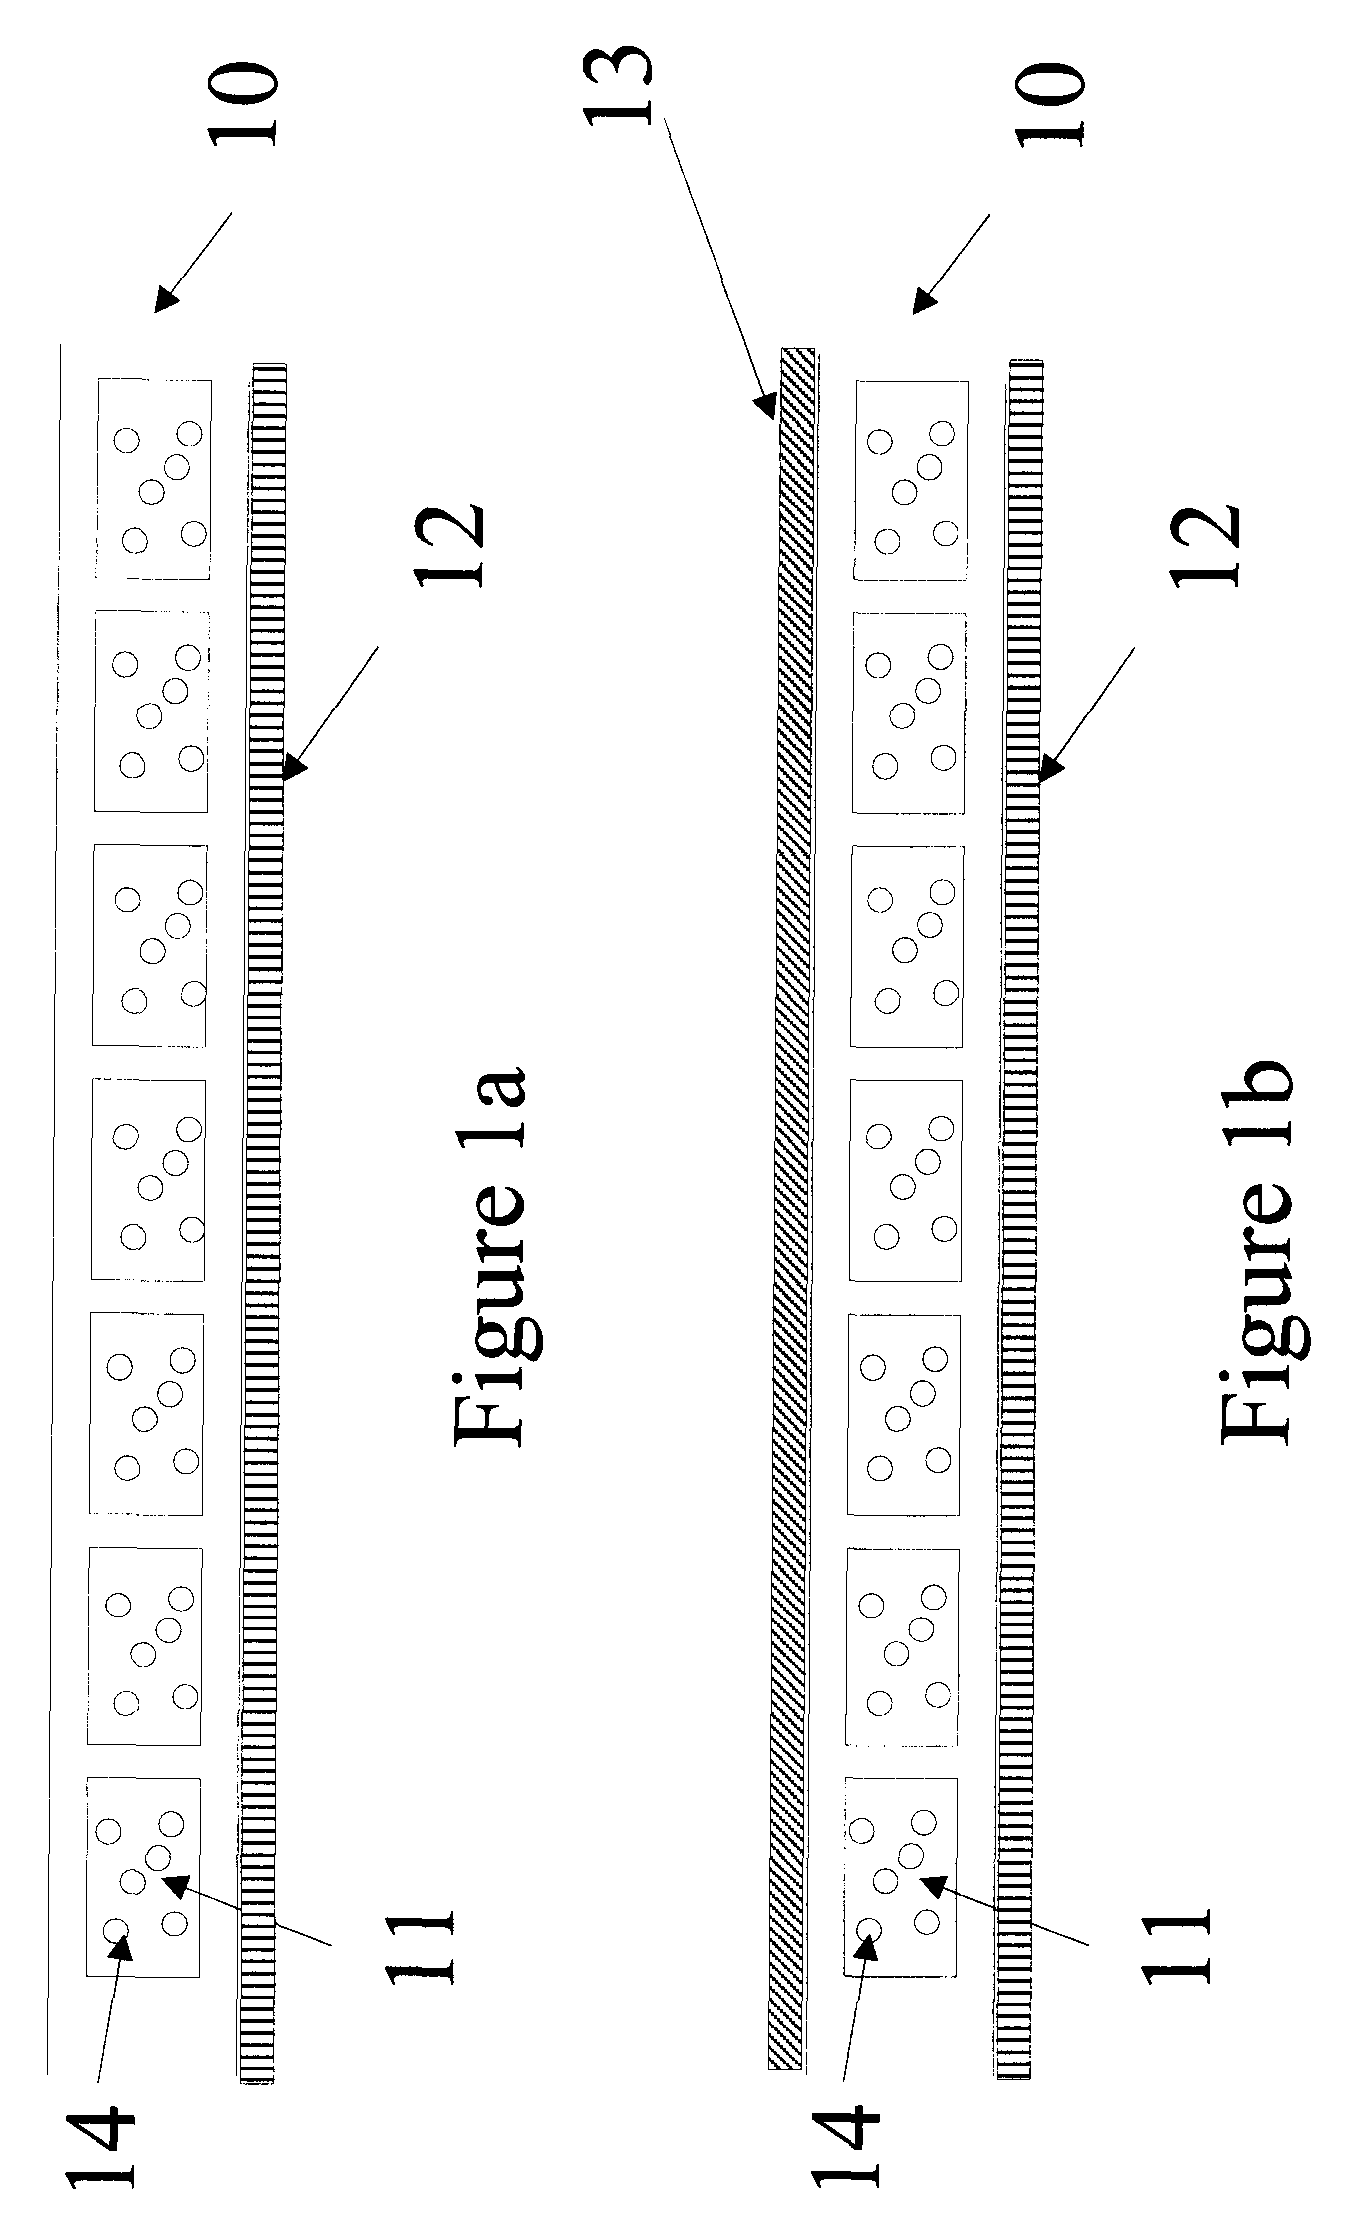 Inspection methods for defects in electrophoretic display and related devices